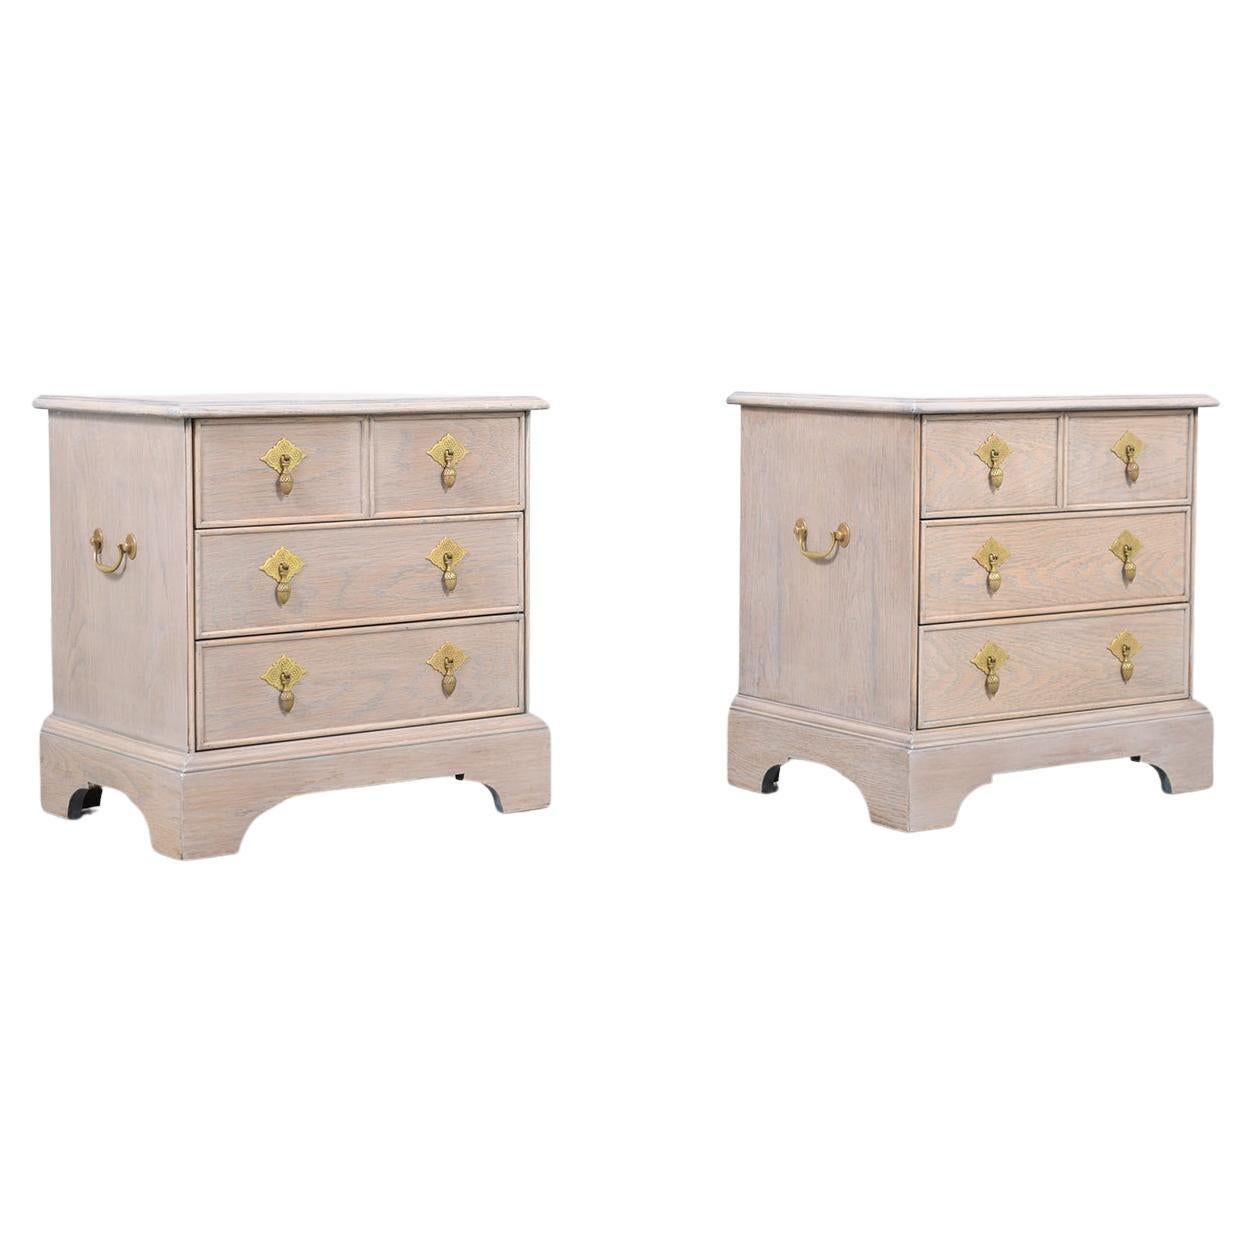 Restored 1960s White Oak Bedside Tables with Whitewashed Finish & Brass Handles For Sale